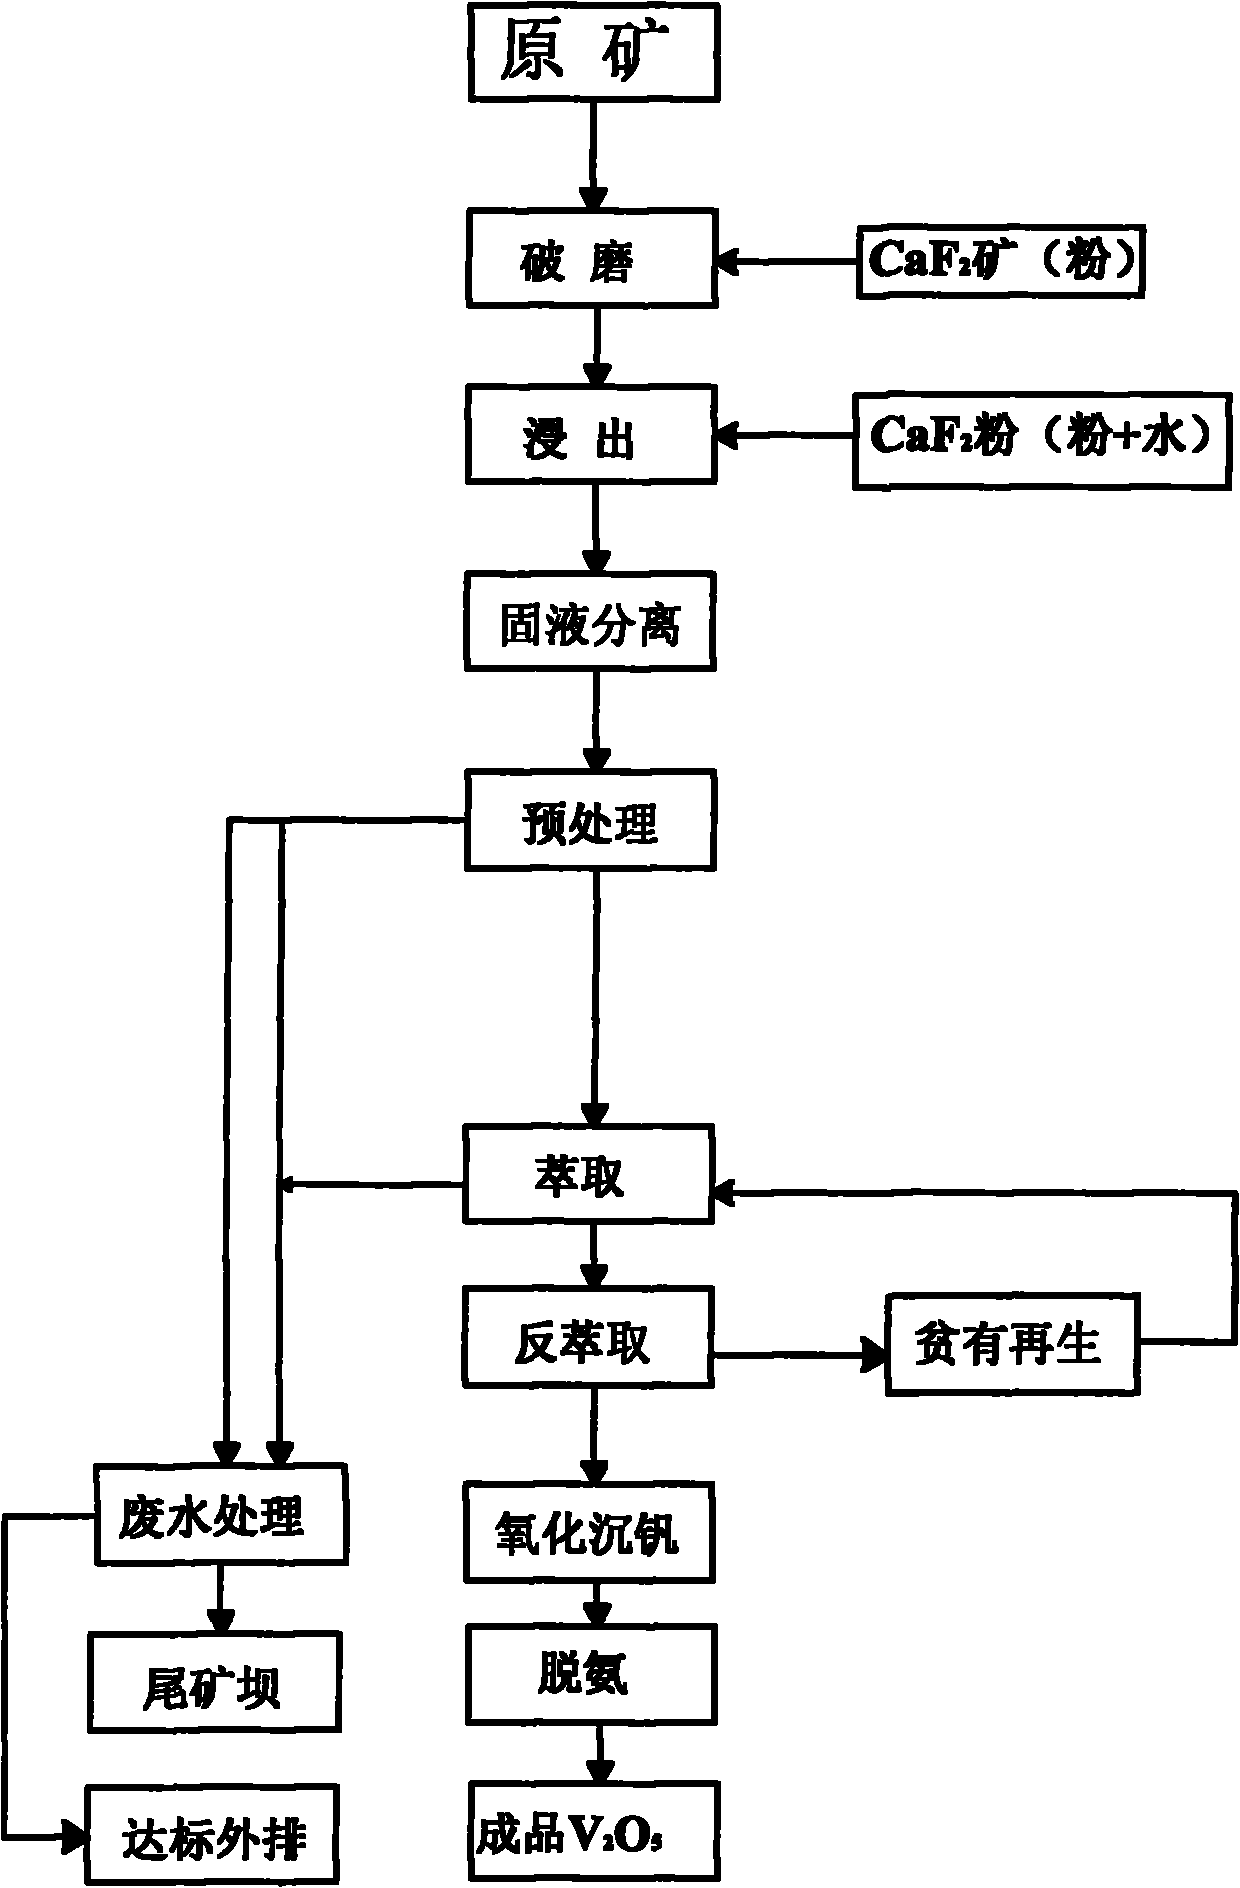 Process for extracting vanadium from stone coal by acid method by using leaching agent